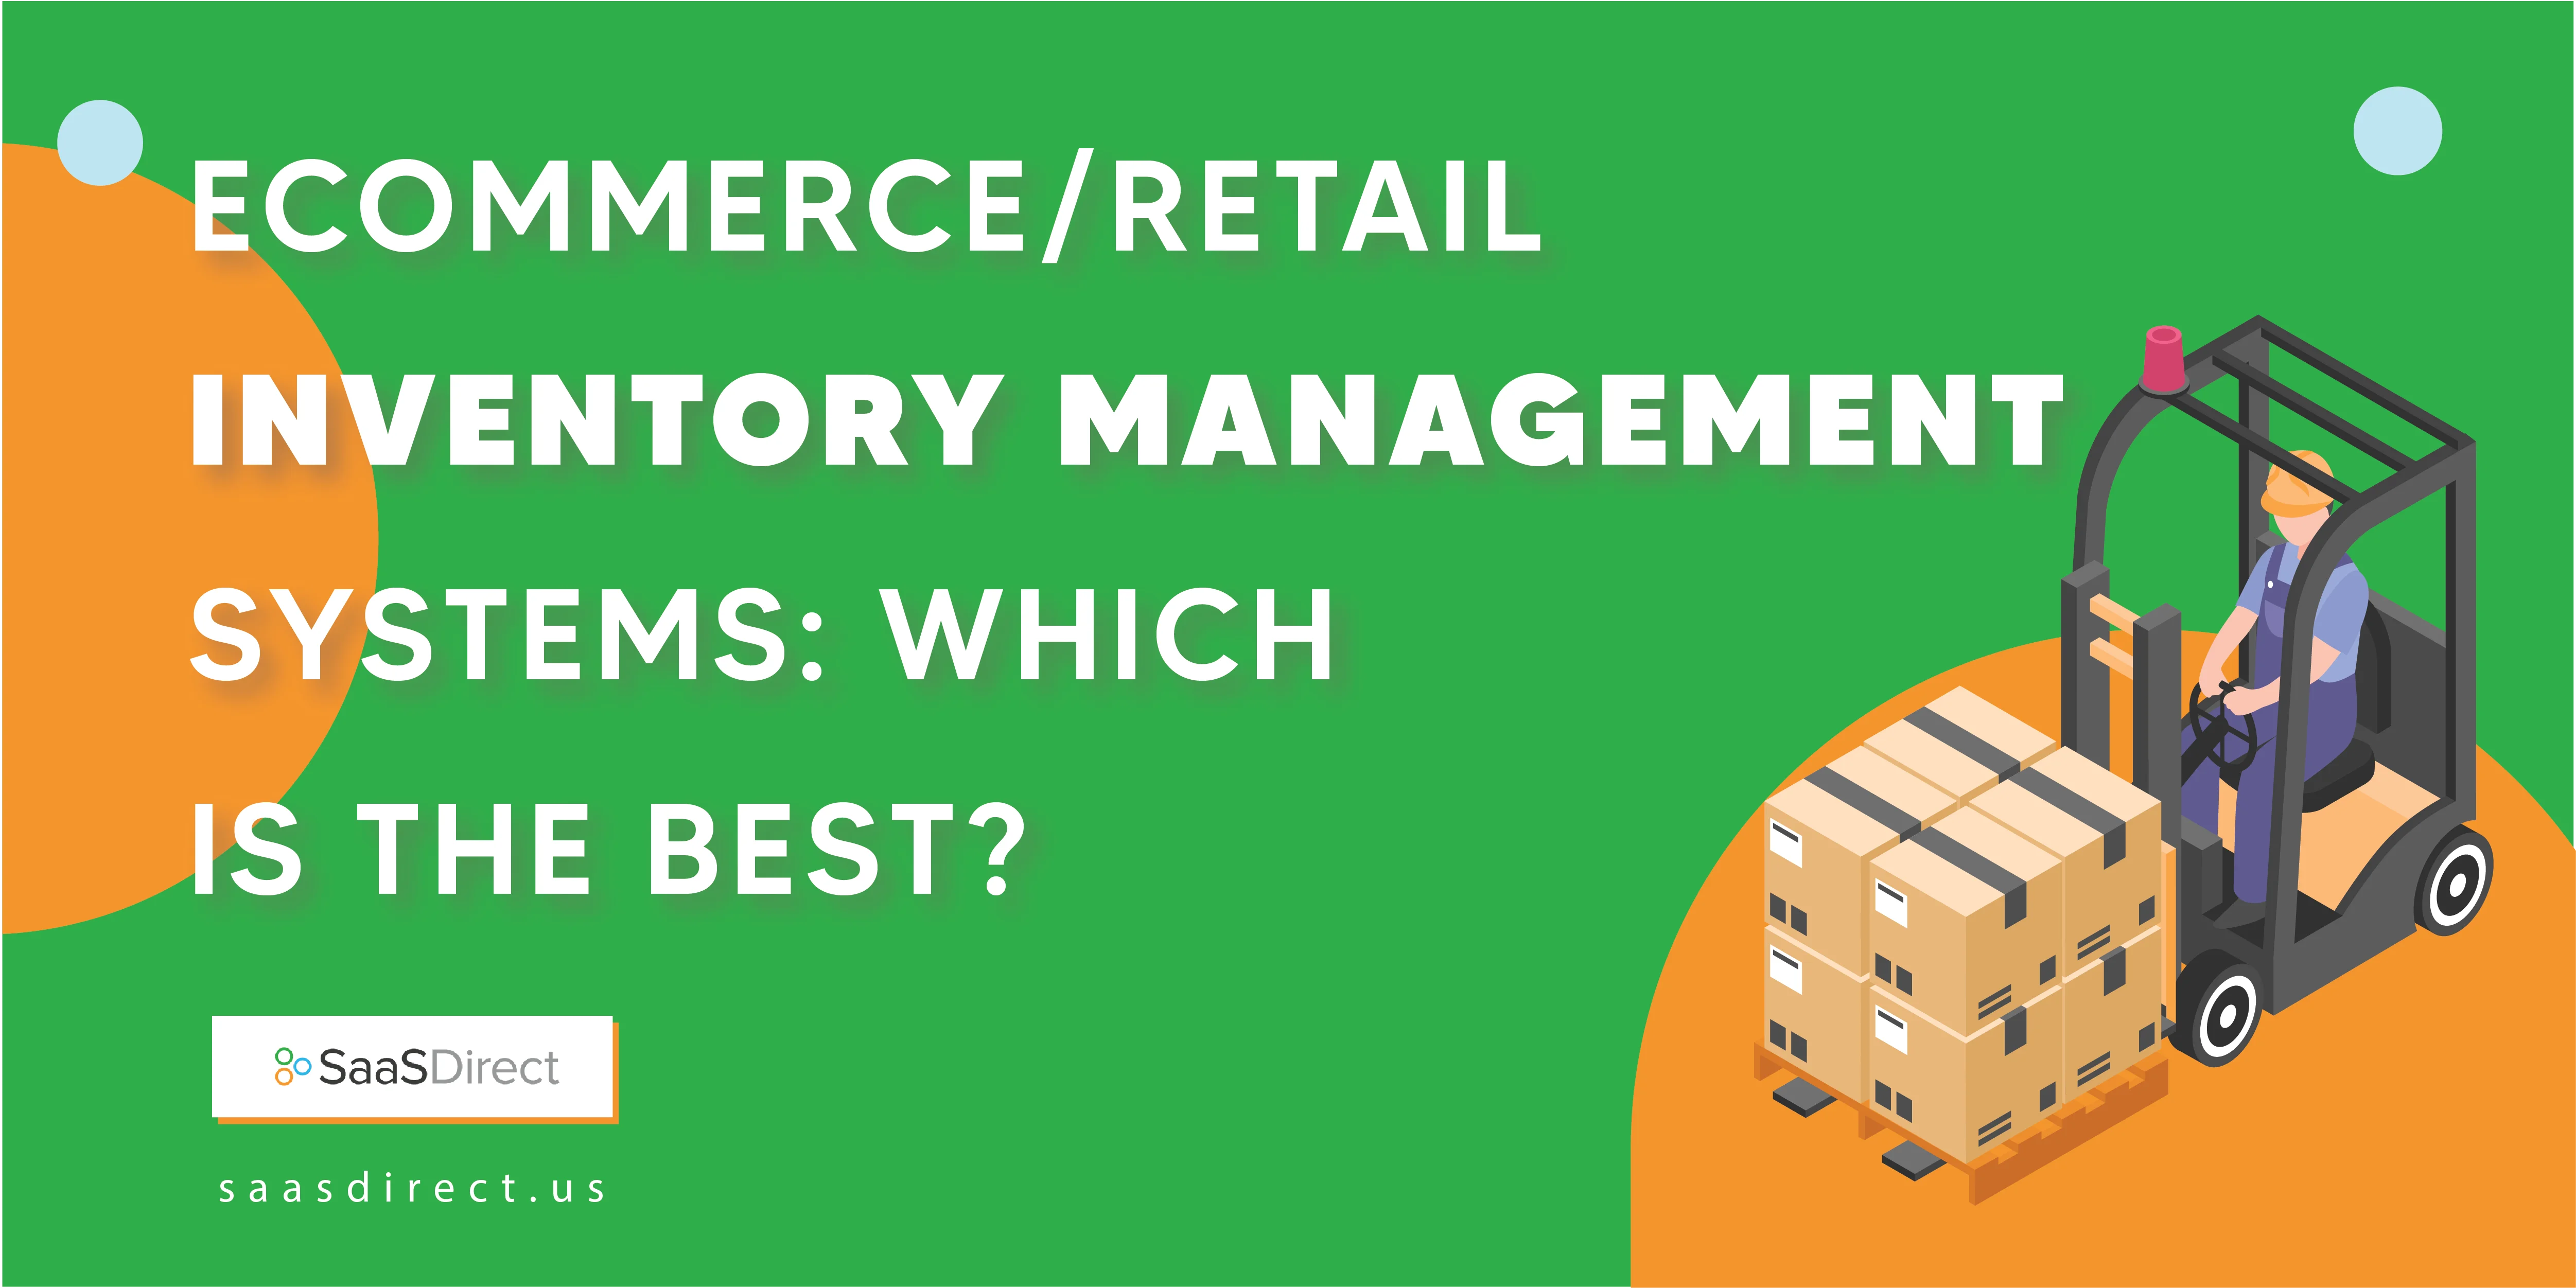 Inventory Management Systems: Which is the Best?